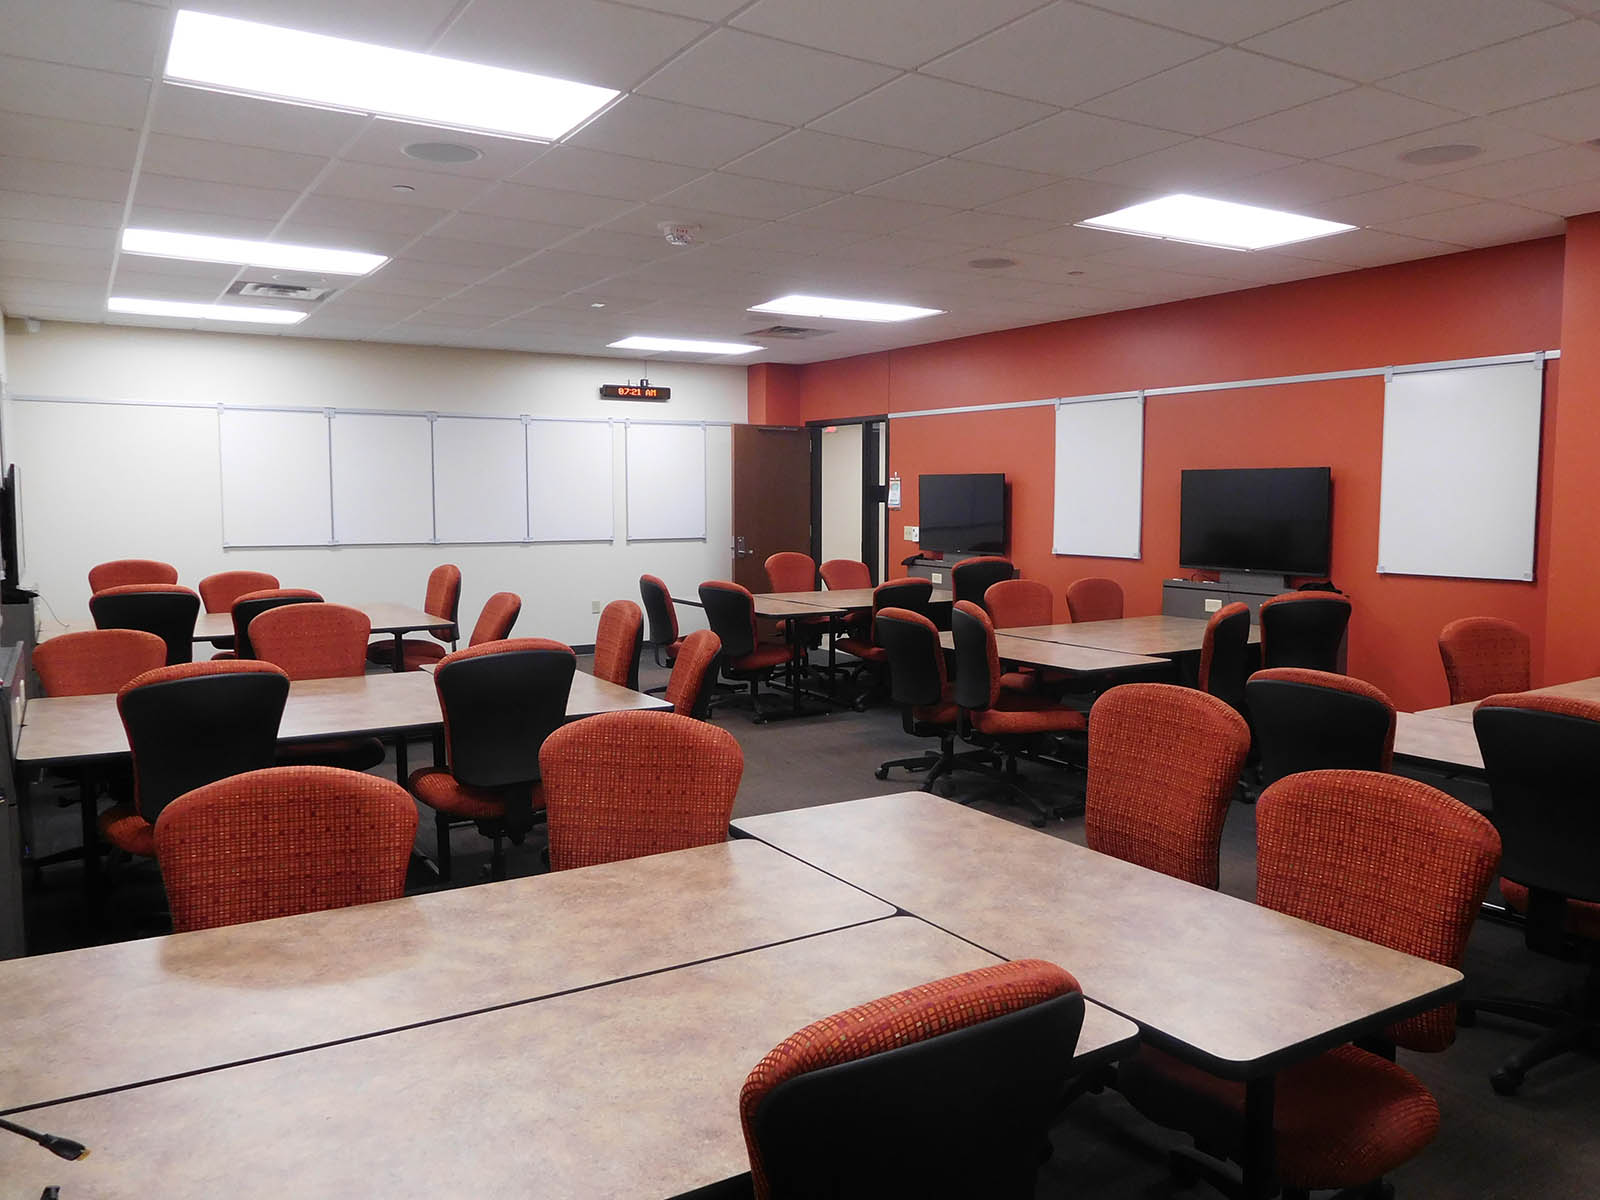 classrooms outfitted with state-of-the-art interactive learning technologies